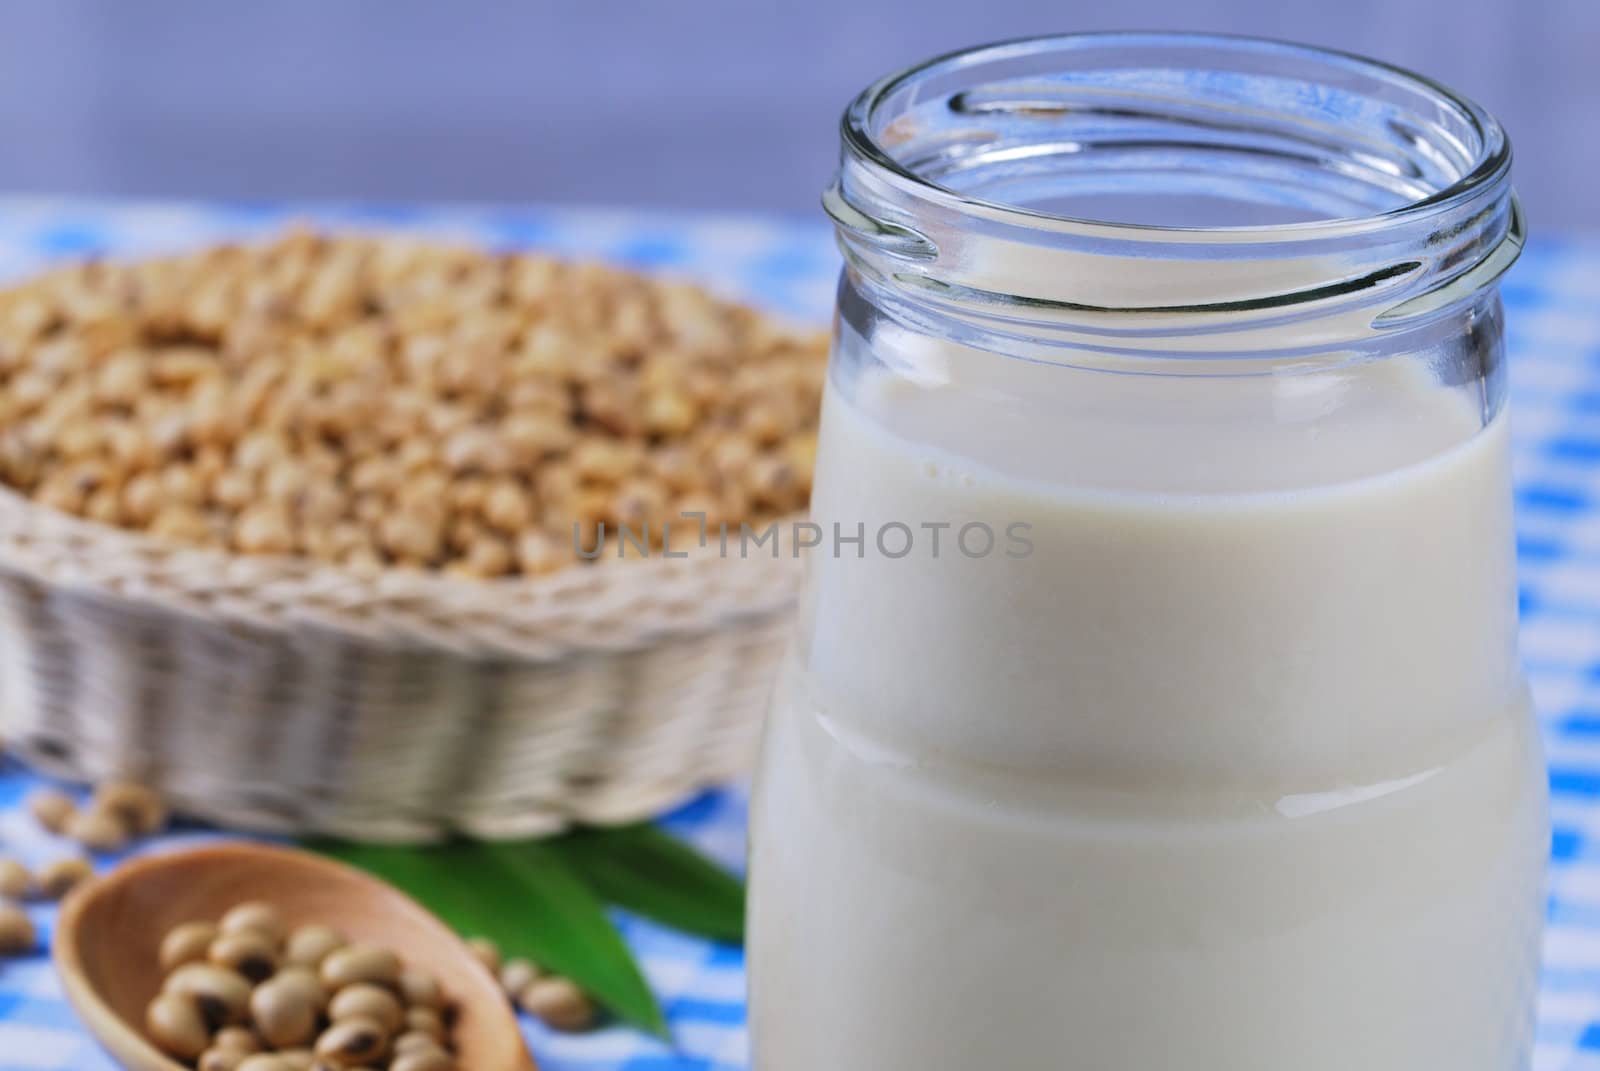 soy milk with soy beans